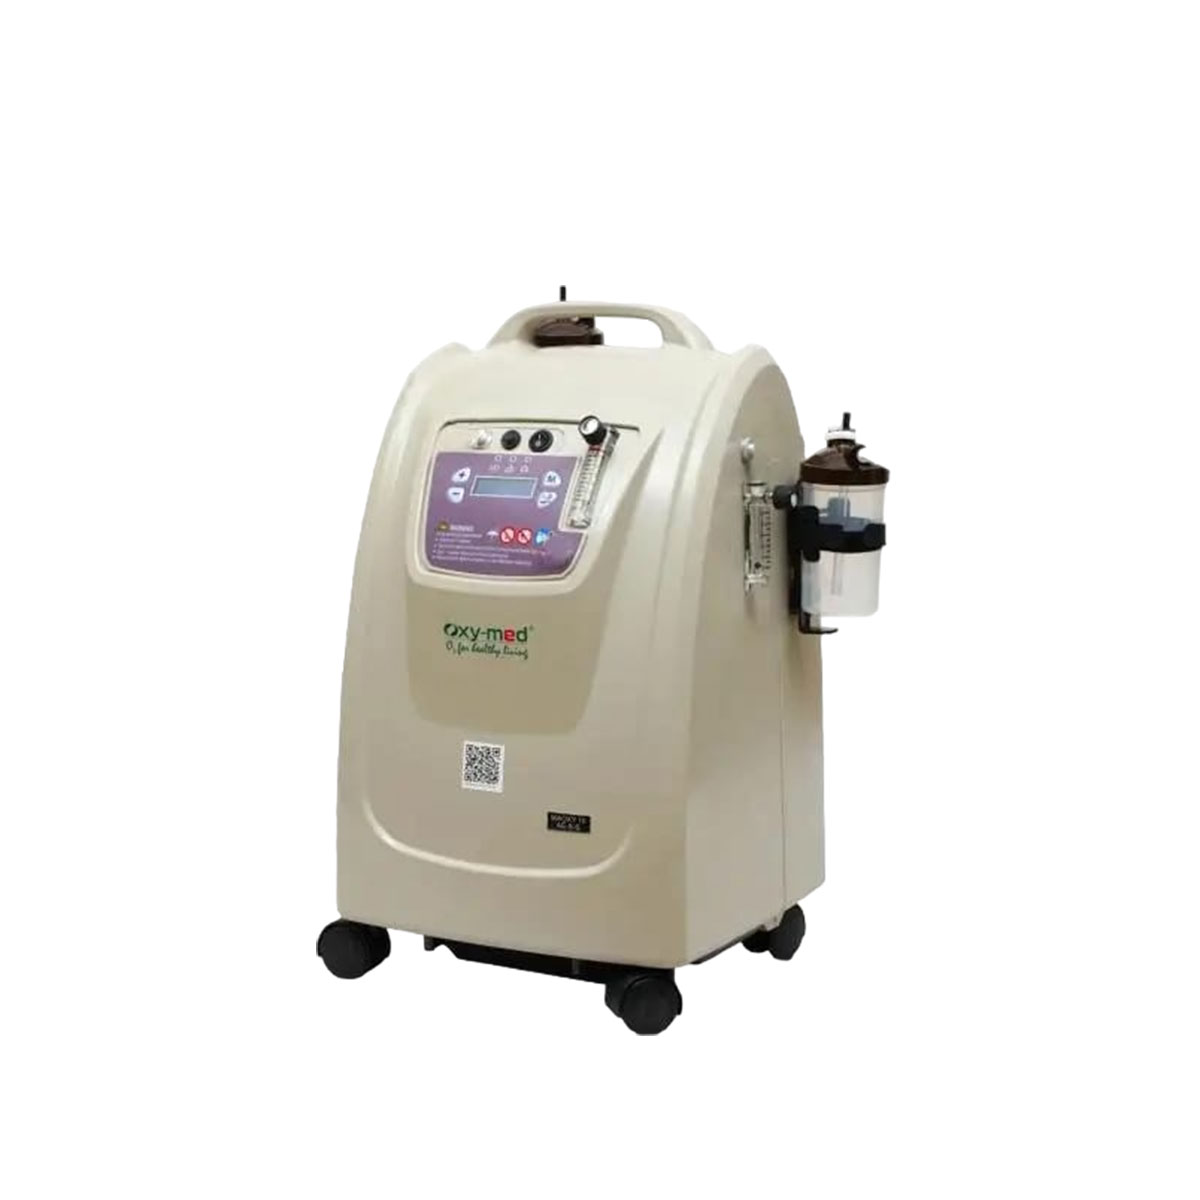 10 Lpm Oxymed Oxygen Concentrator On Sale Suppliers, Service Provider in Anand vihar